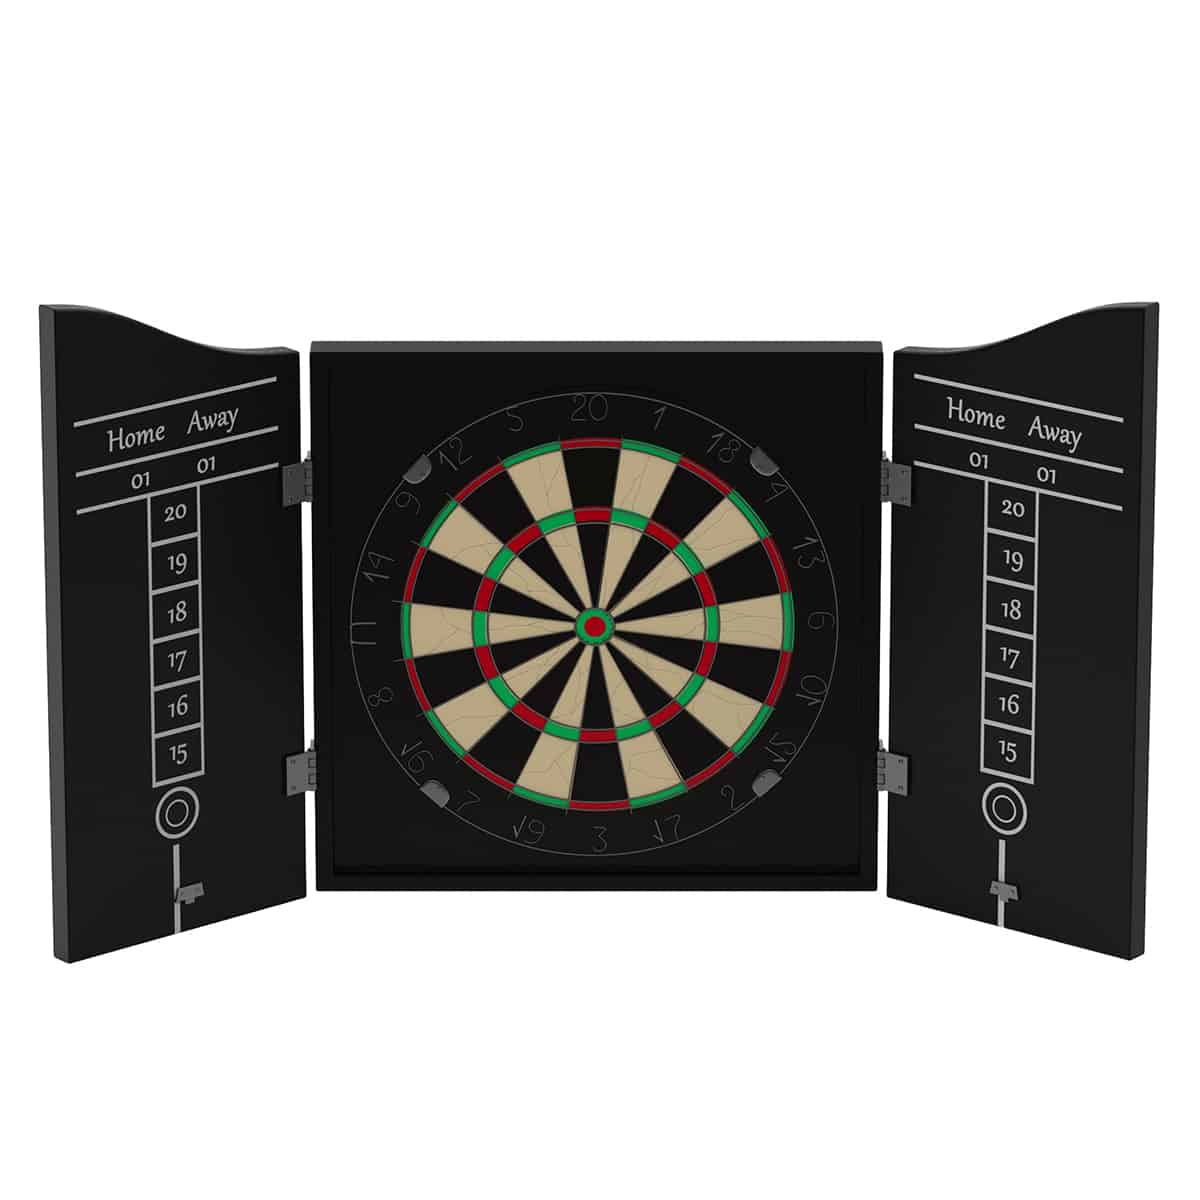 How to Hang a Dartboard Cabinet